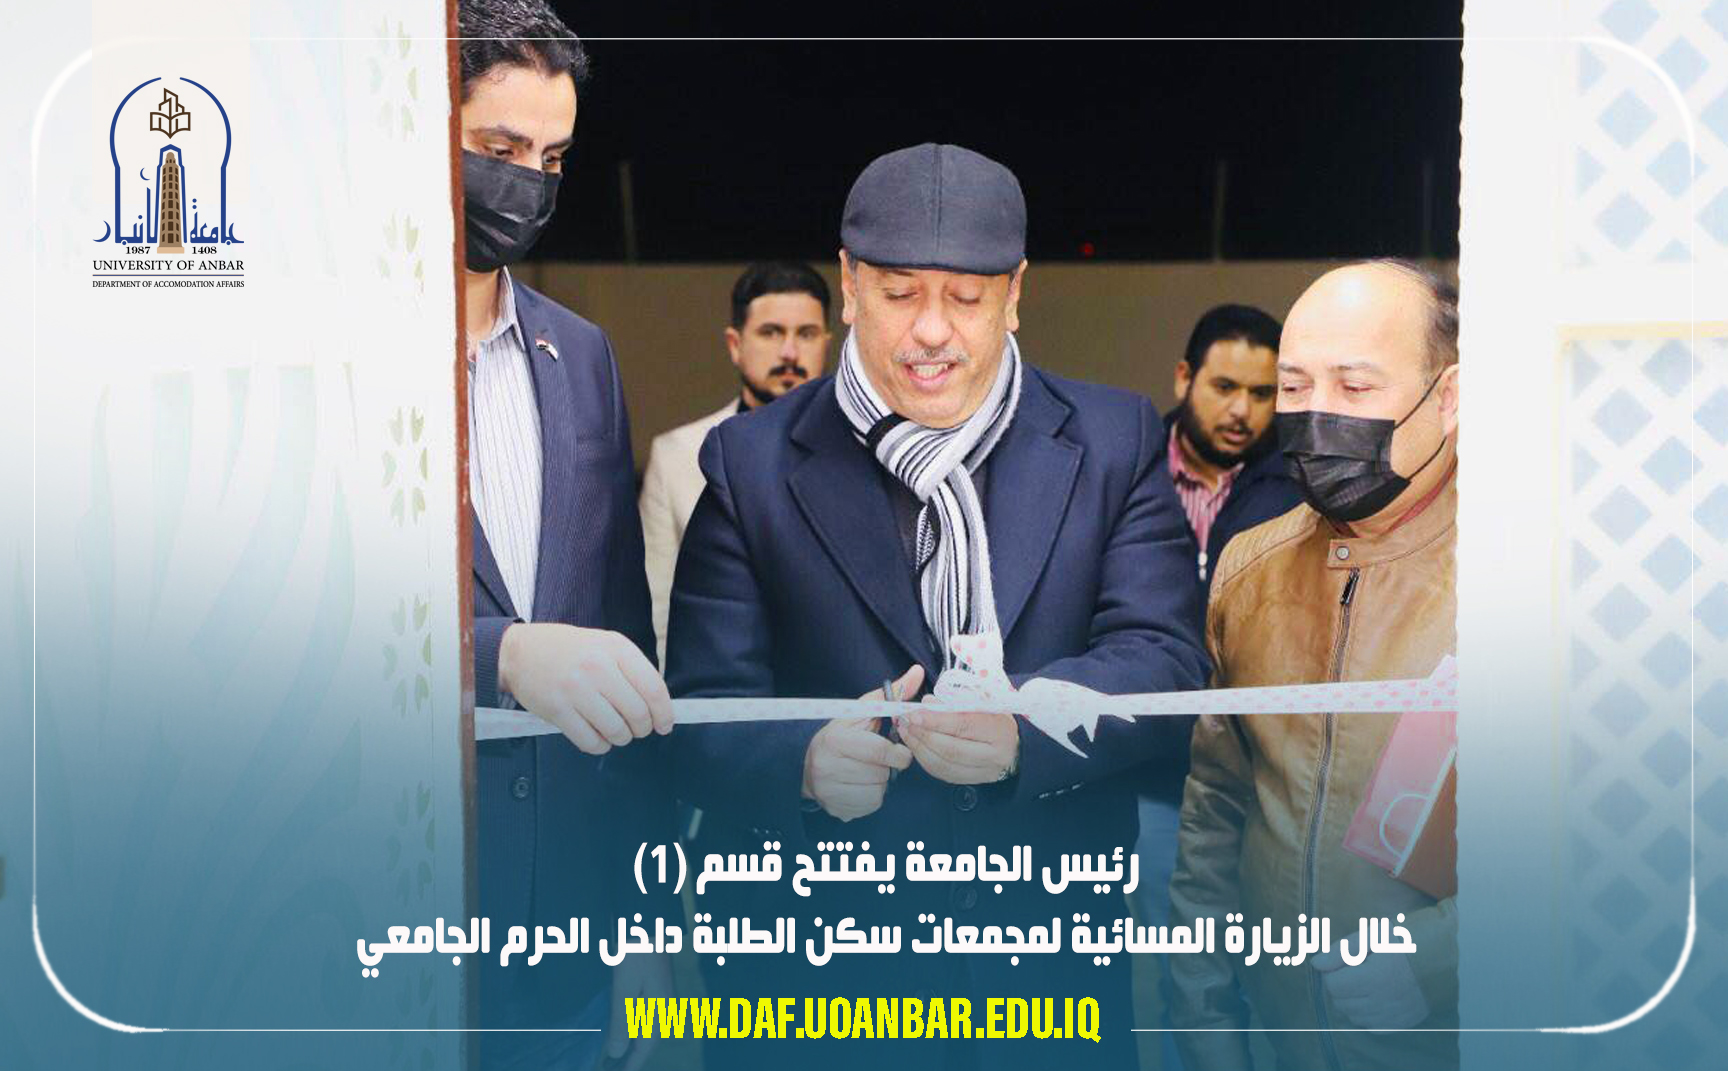 The President of the University Initiates Department (1) During the Evening Visit to Student Housing Complexes on Campus